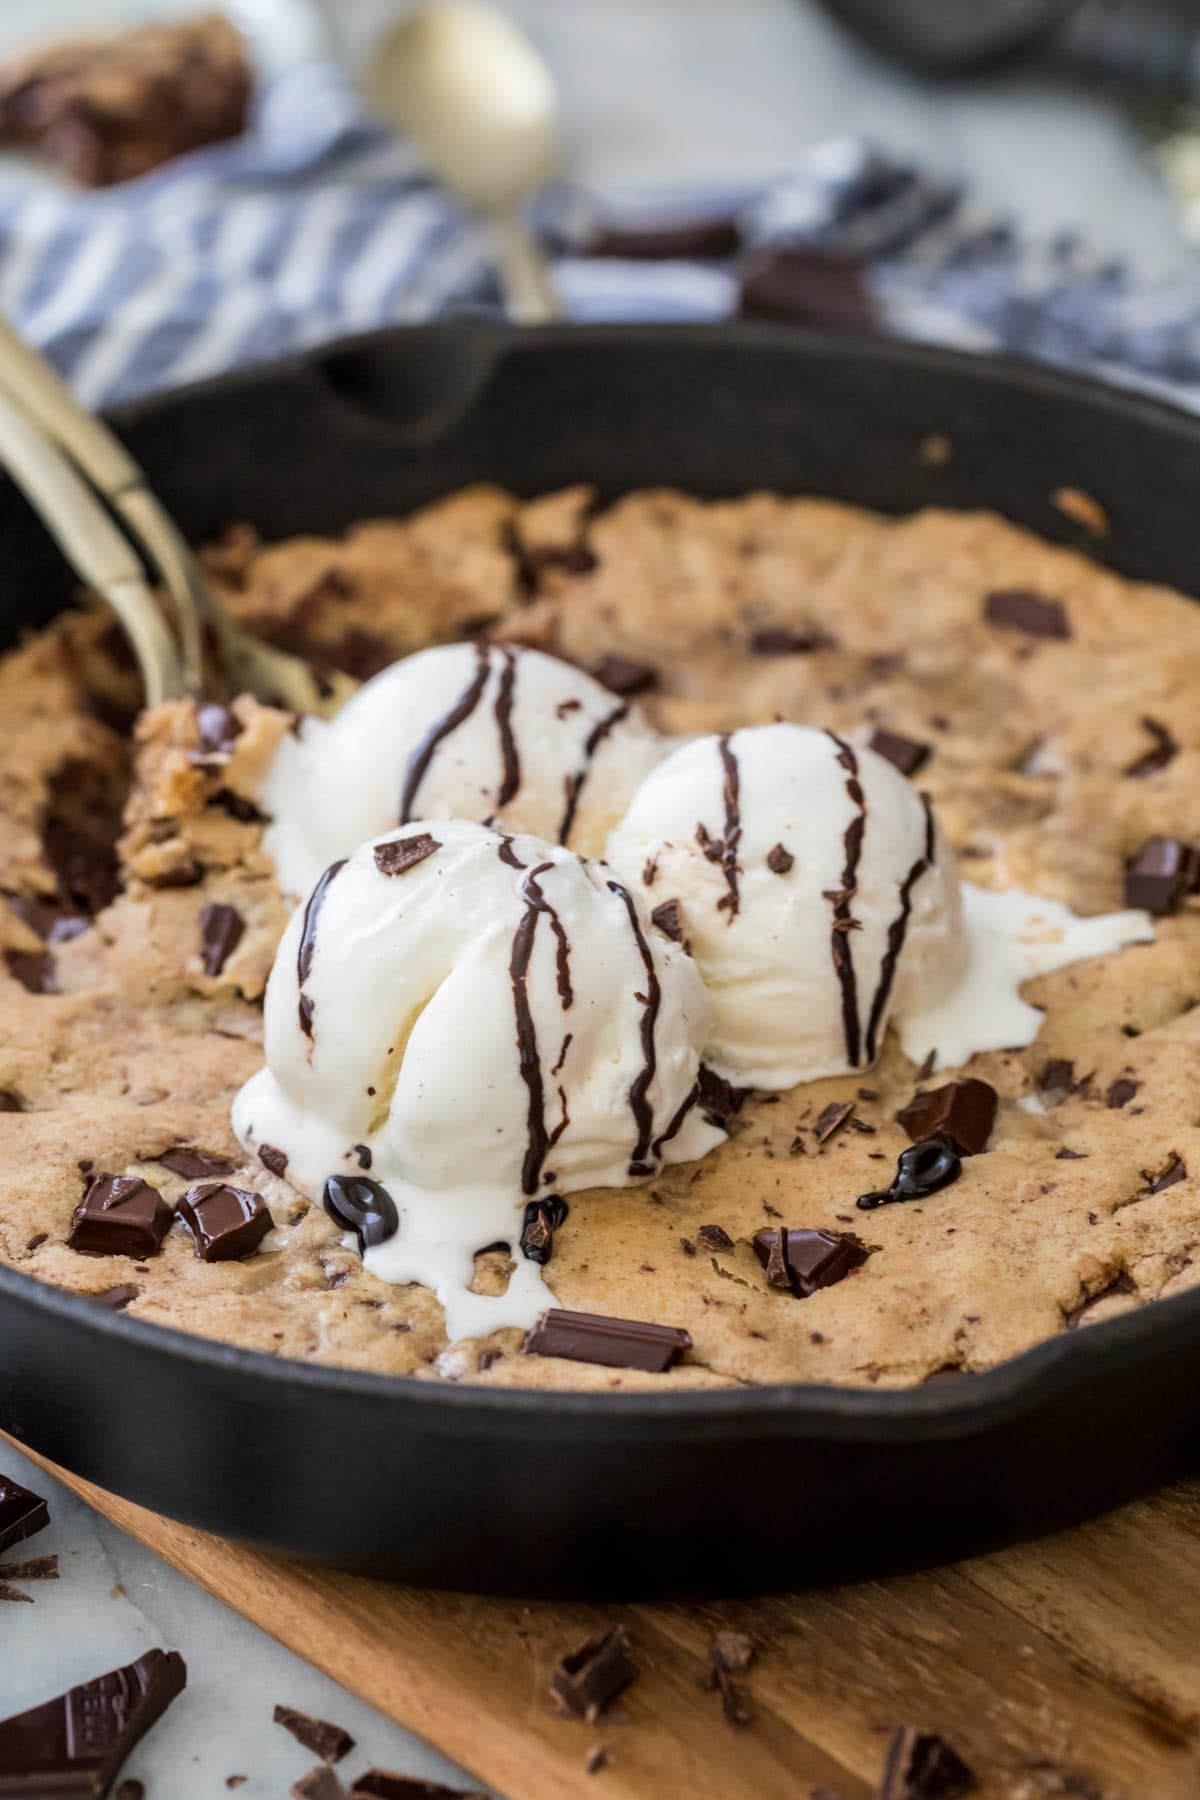 three scoops of vanilla ice cream melting into a warm pizookie baked in a cast iron skillet